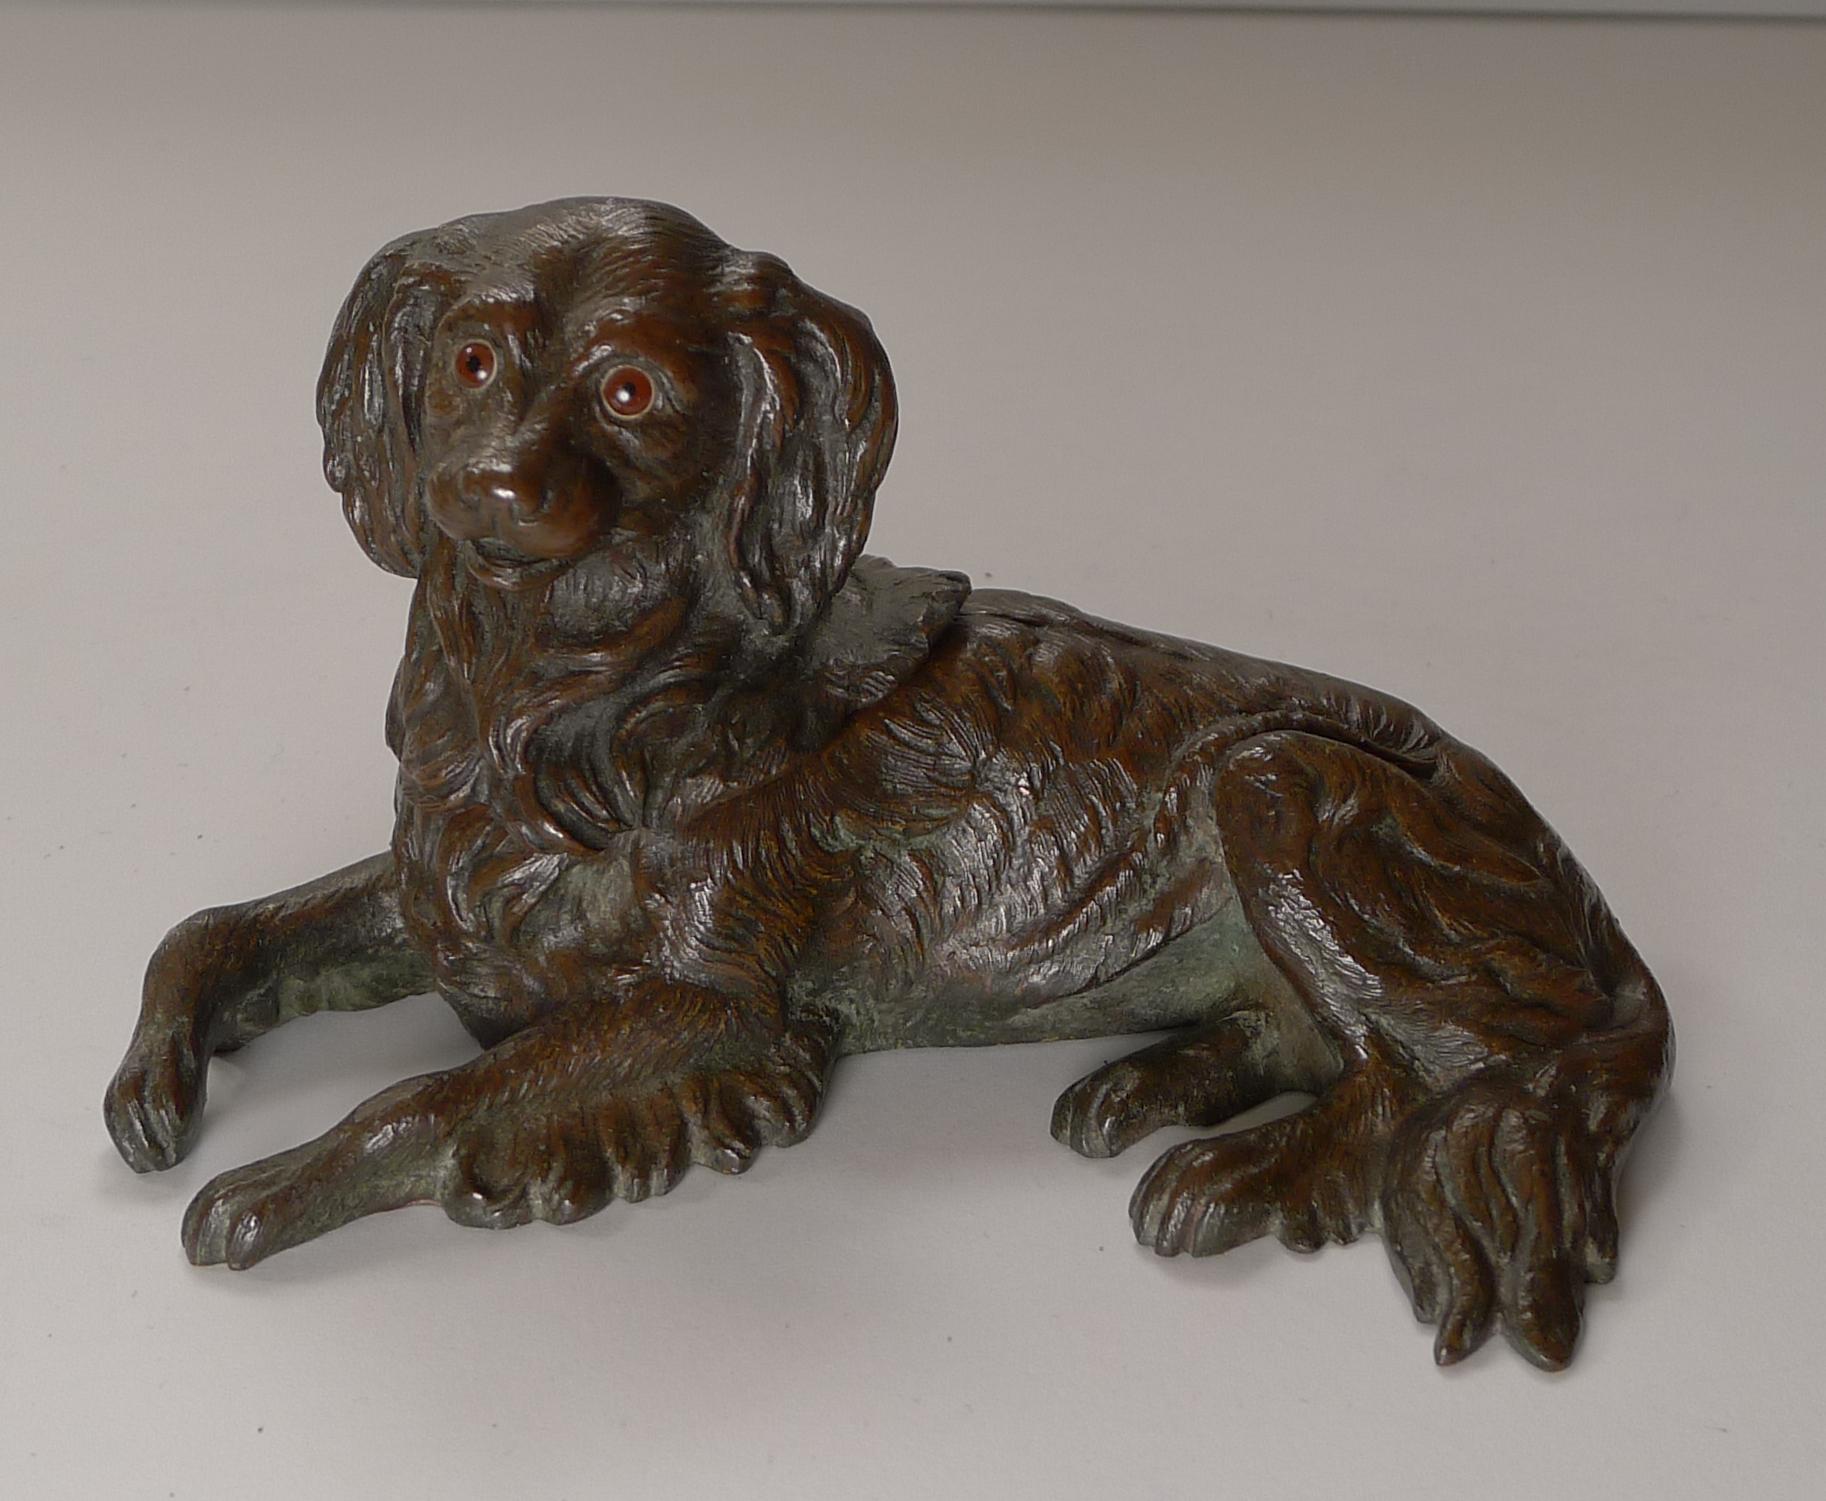 A handsome Victorian novelty inkwell, cast in bronze in the form of a King Charles Spaniel, beautifully executed with two lovely glass eyes.

The underside is inscribed with a roman numeral IV. The hinged head lifts to reveal a removable glass ink